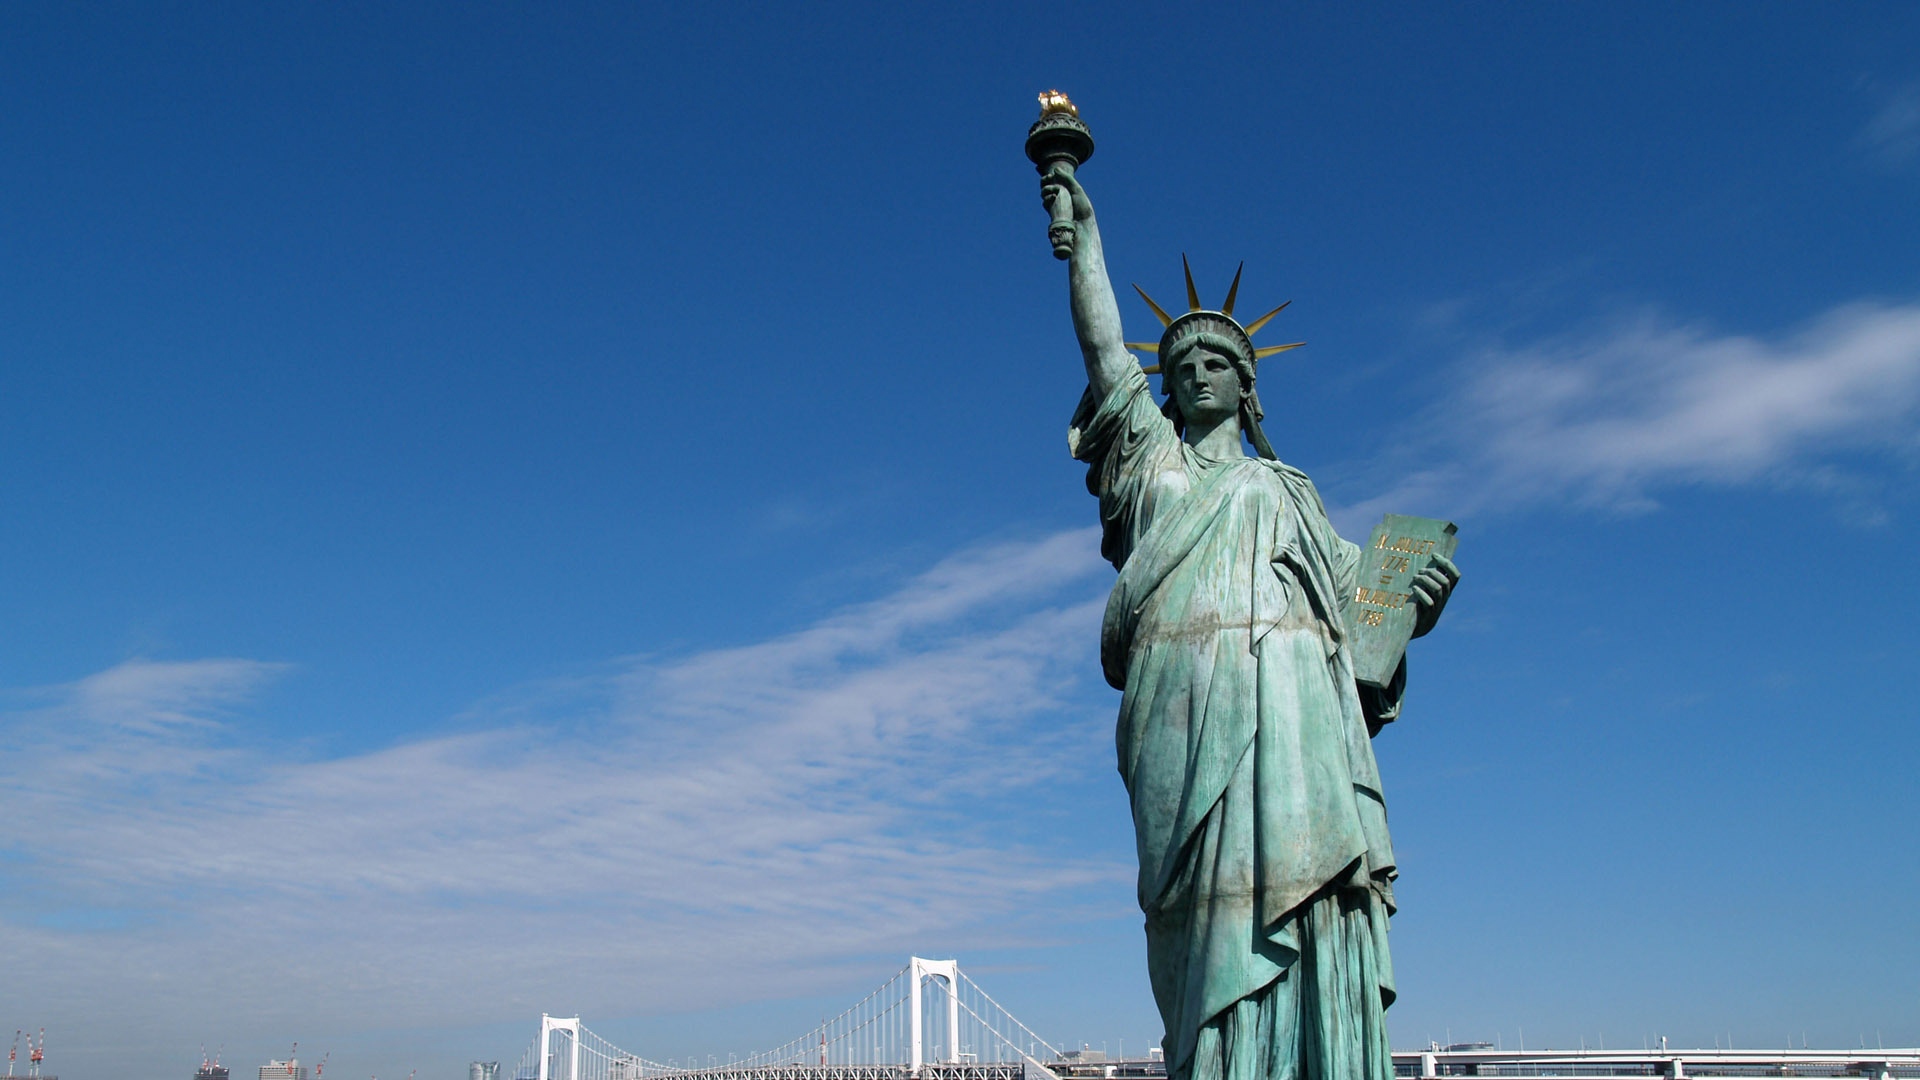 Wallpaper Statue Of Liberty, United States, New York - Statue Of Liberty 1080p - HD Wallpaper 